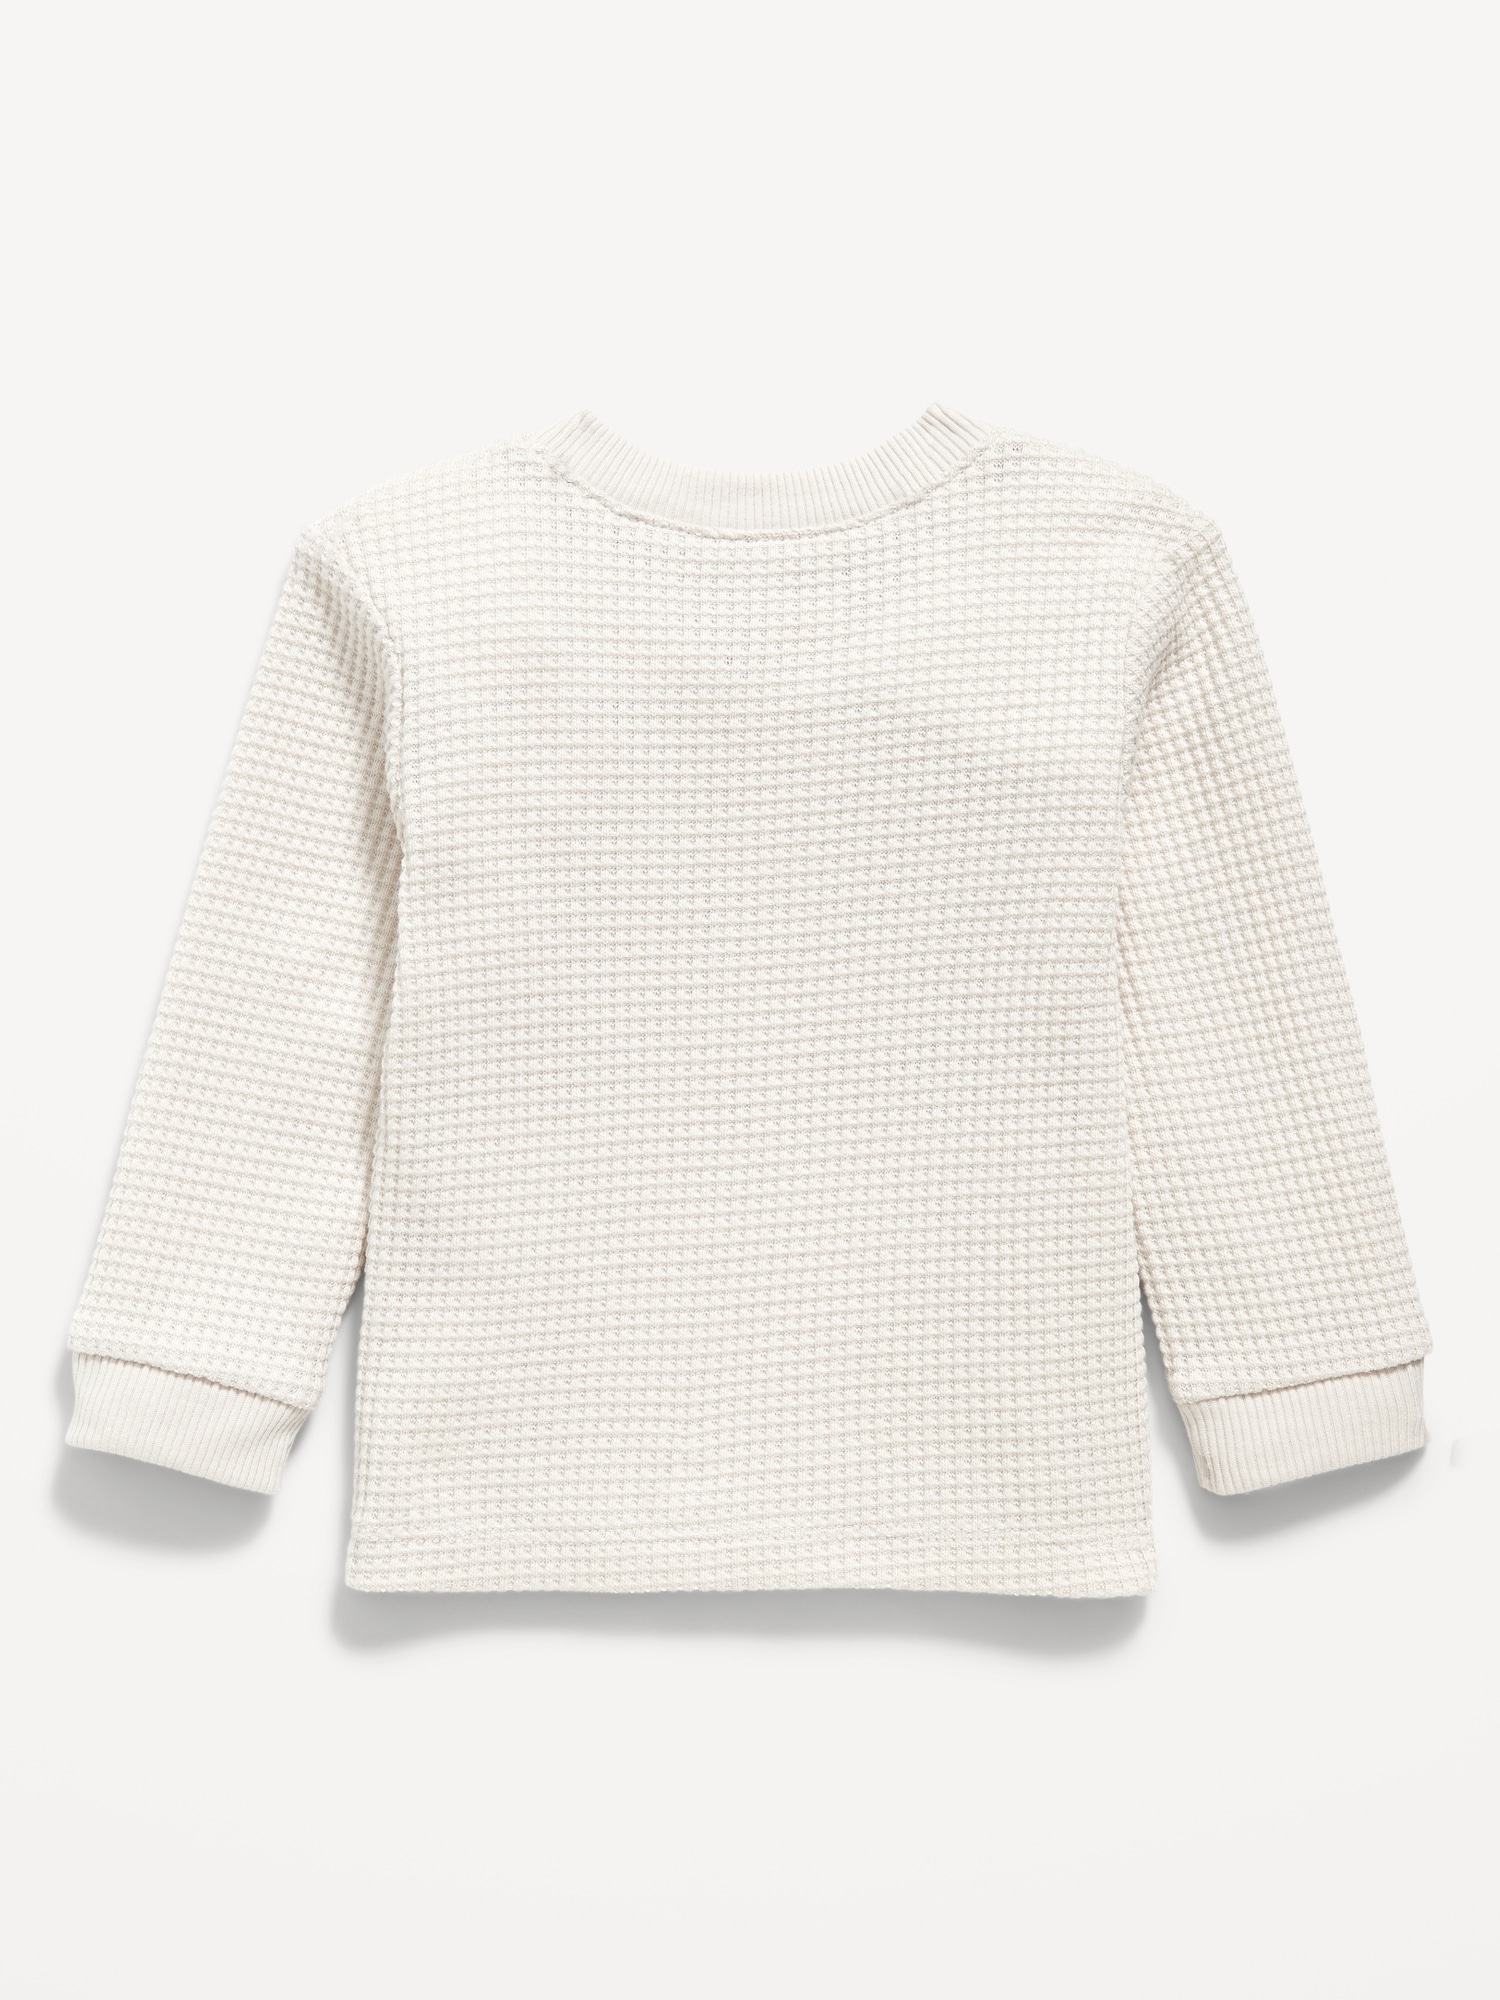 Long-Sleeve Thermal-Knit Henley T-Shirt for Baby | Old Navy